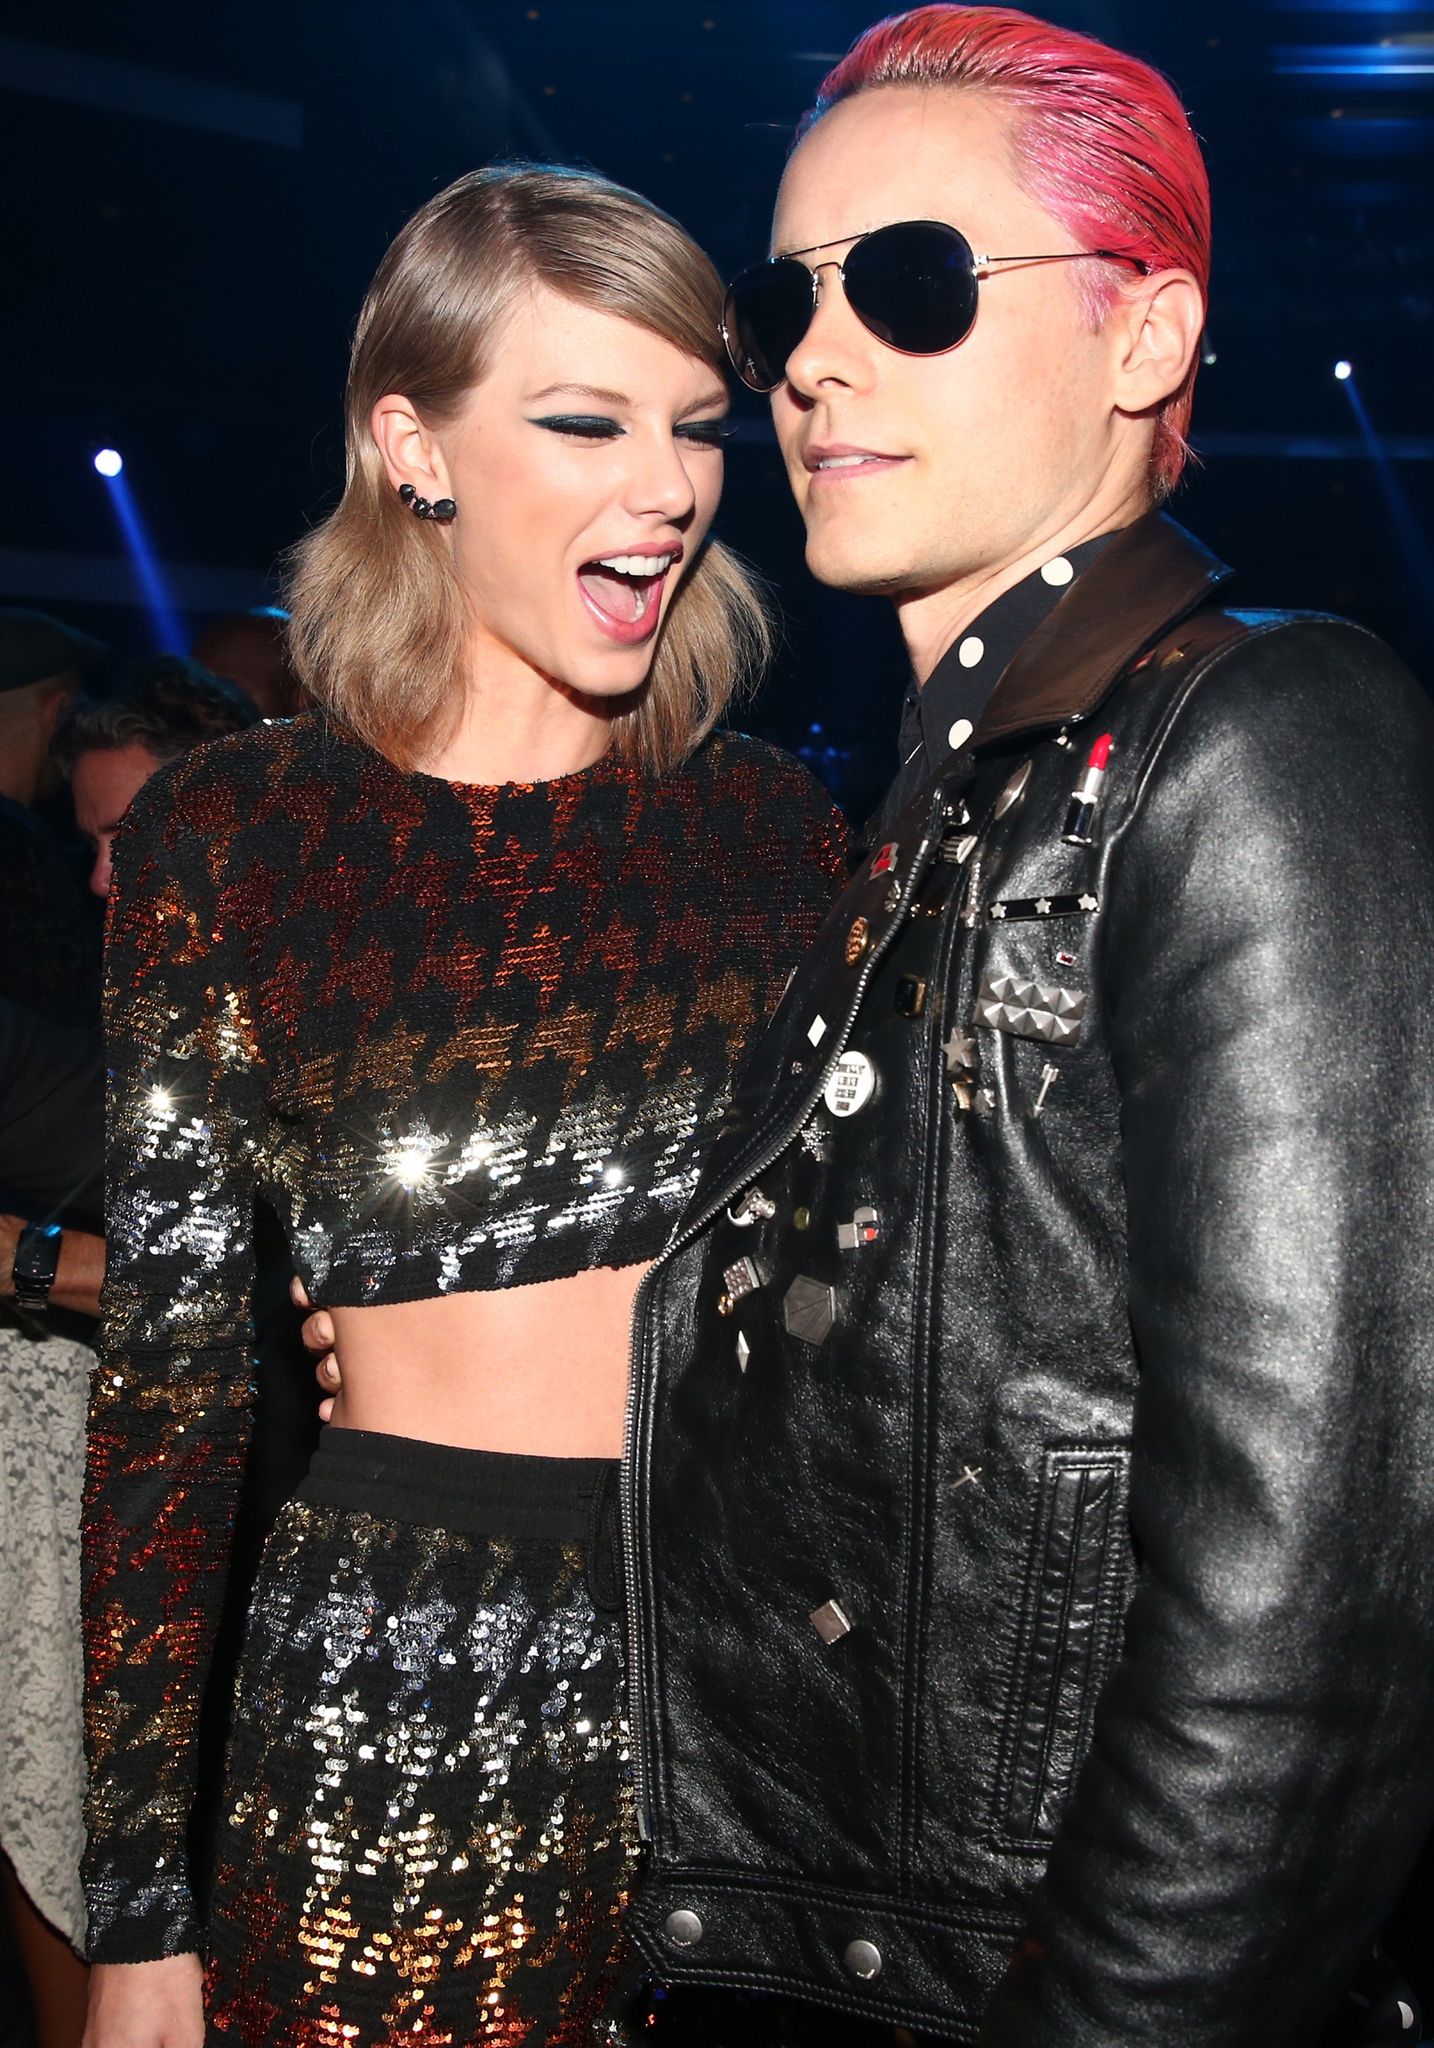 Jared Leto and Taylor Swift